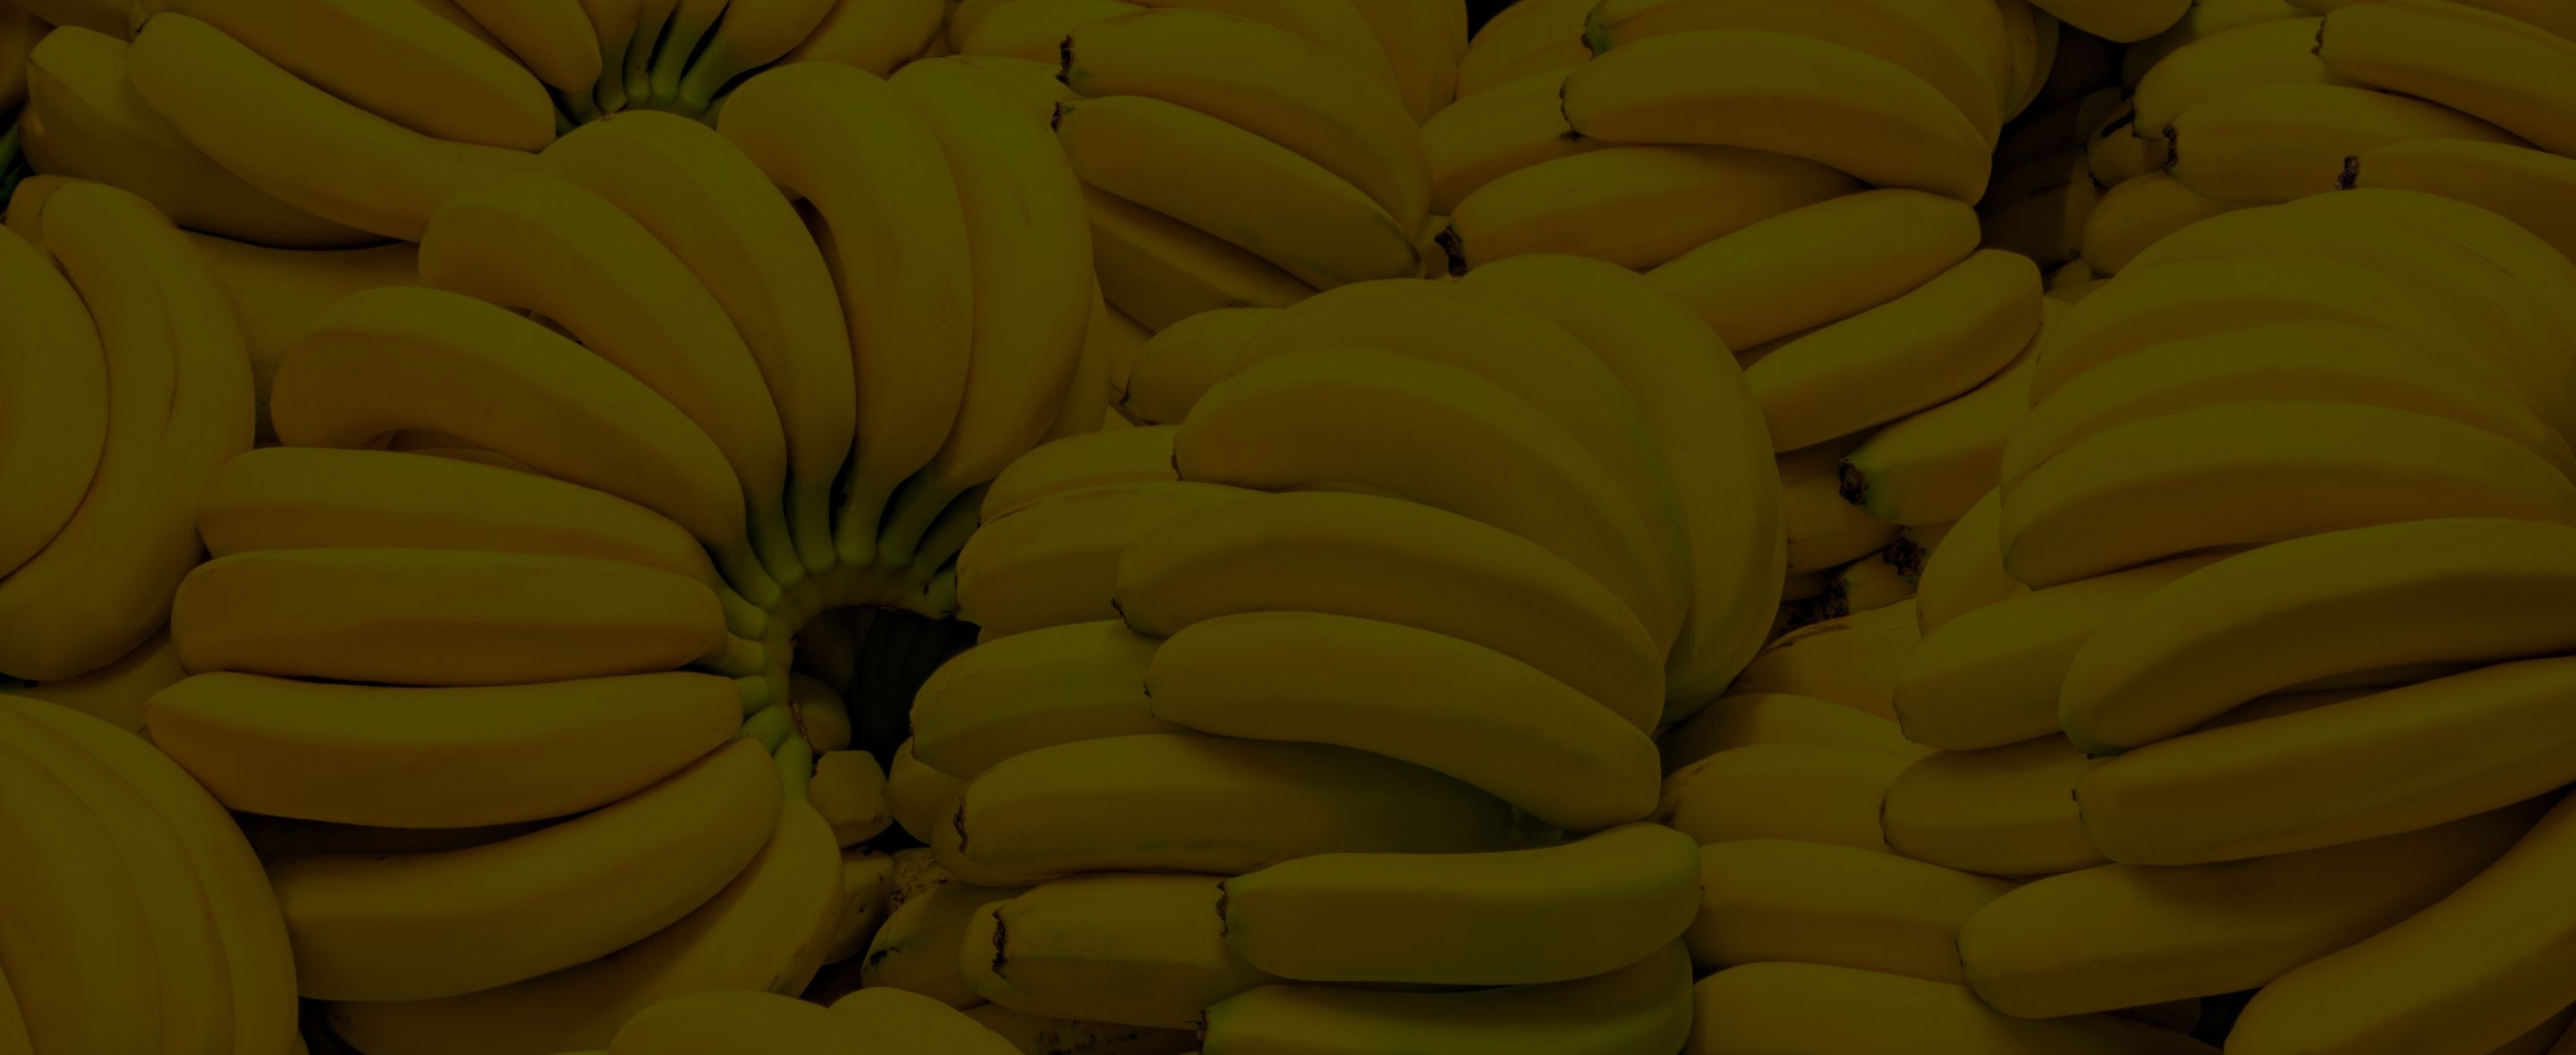 The biggest container ships can hold up to 745 million bananas- Header.jpg